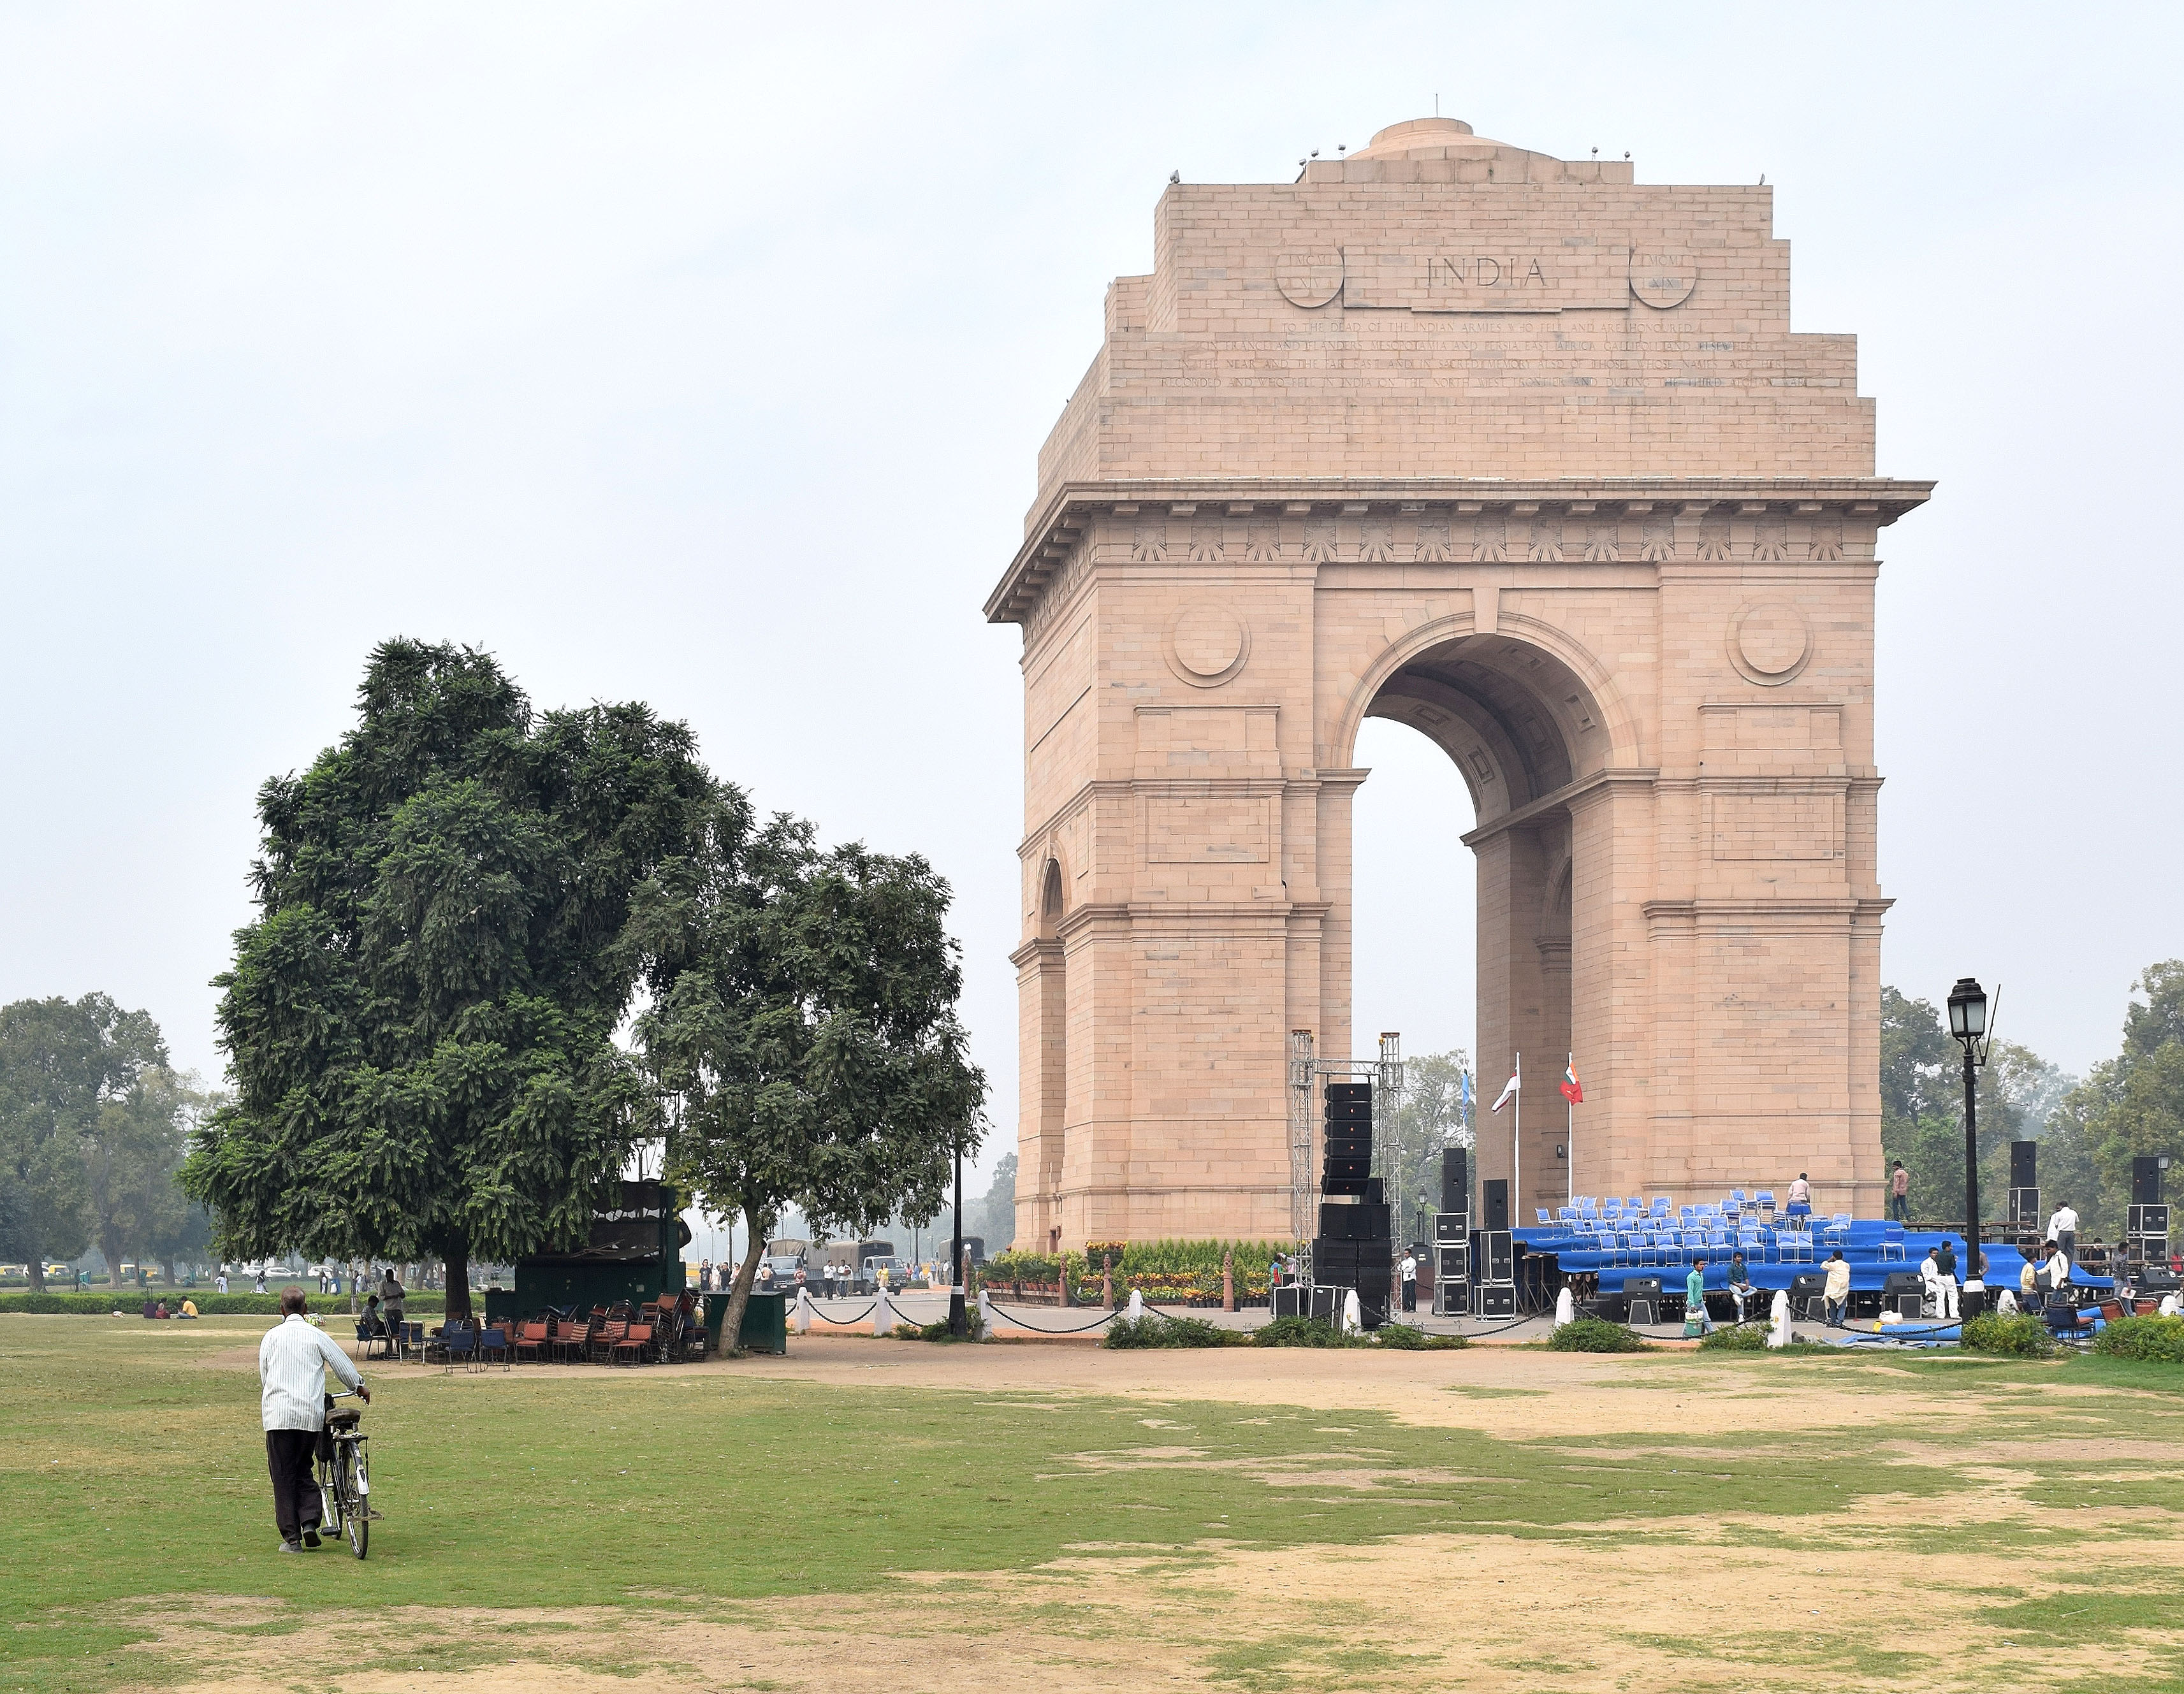 India Gate, New Delhi from West